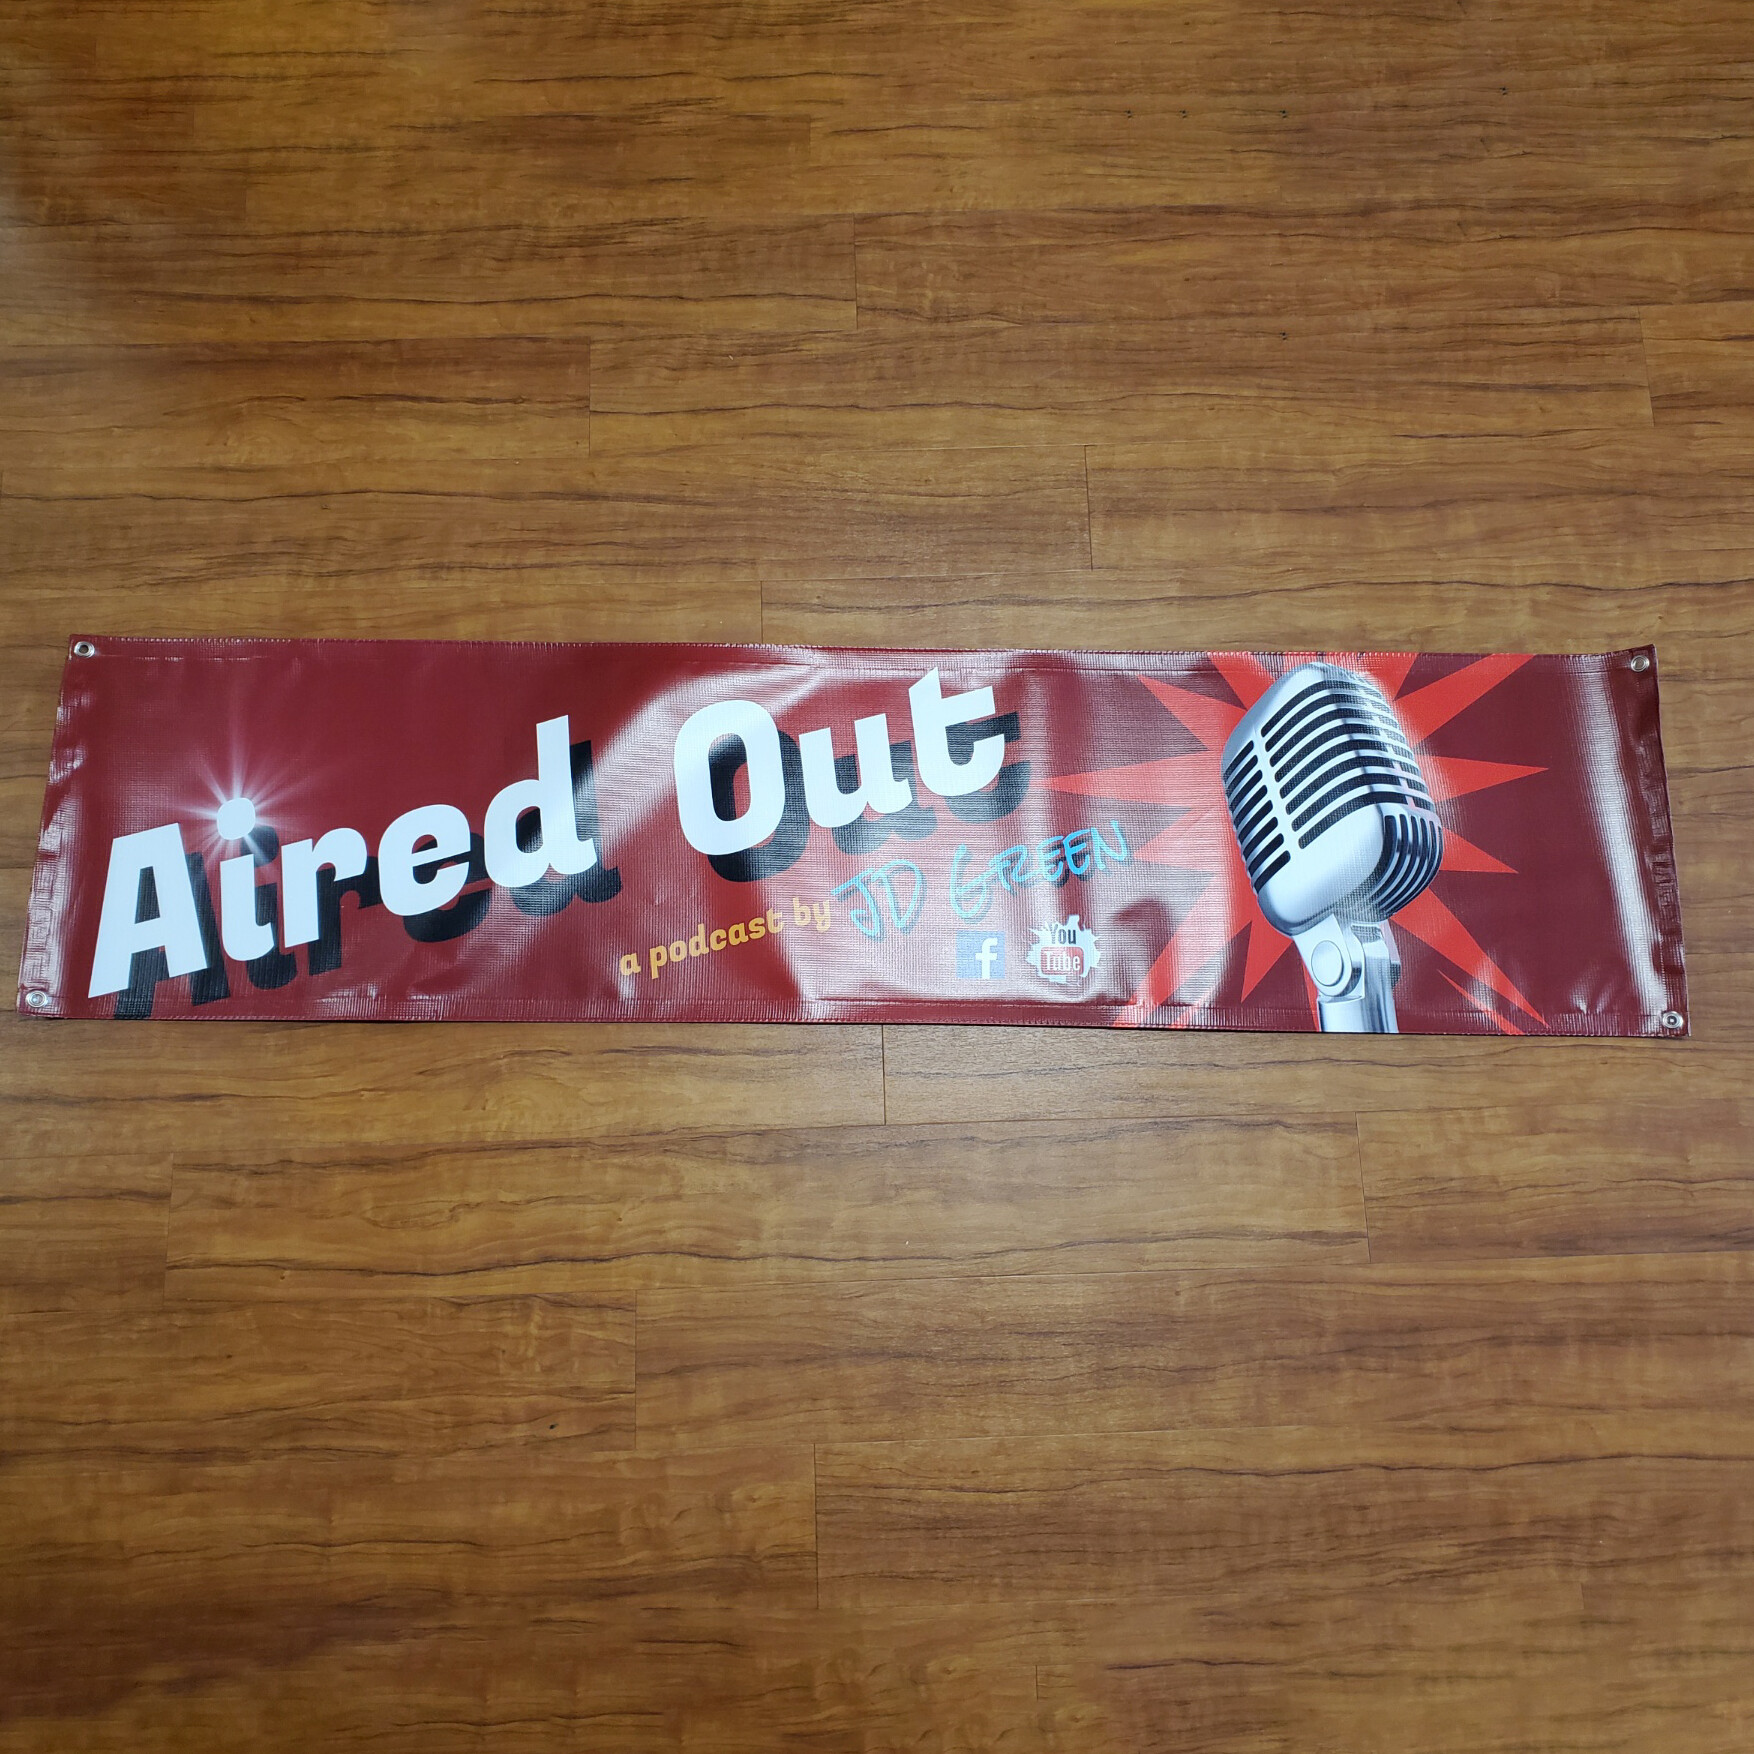 Outdoor Vinyl Banner for Aired Out Podcast by JD Green